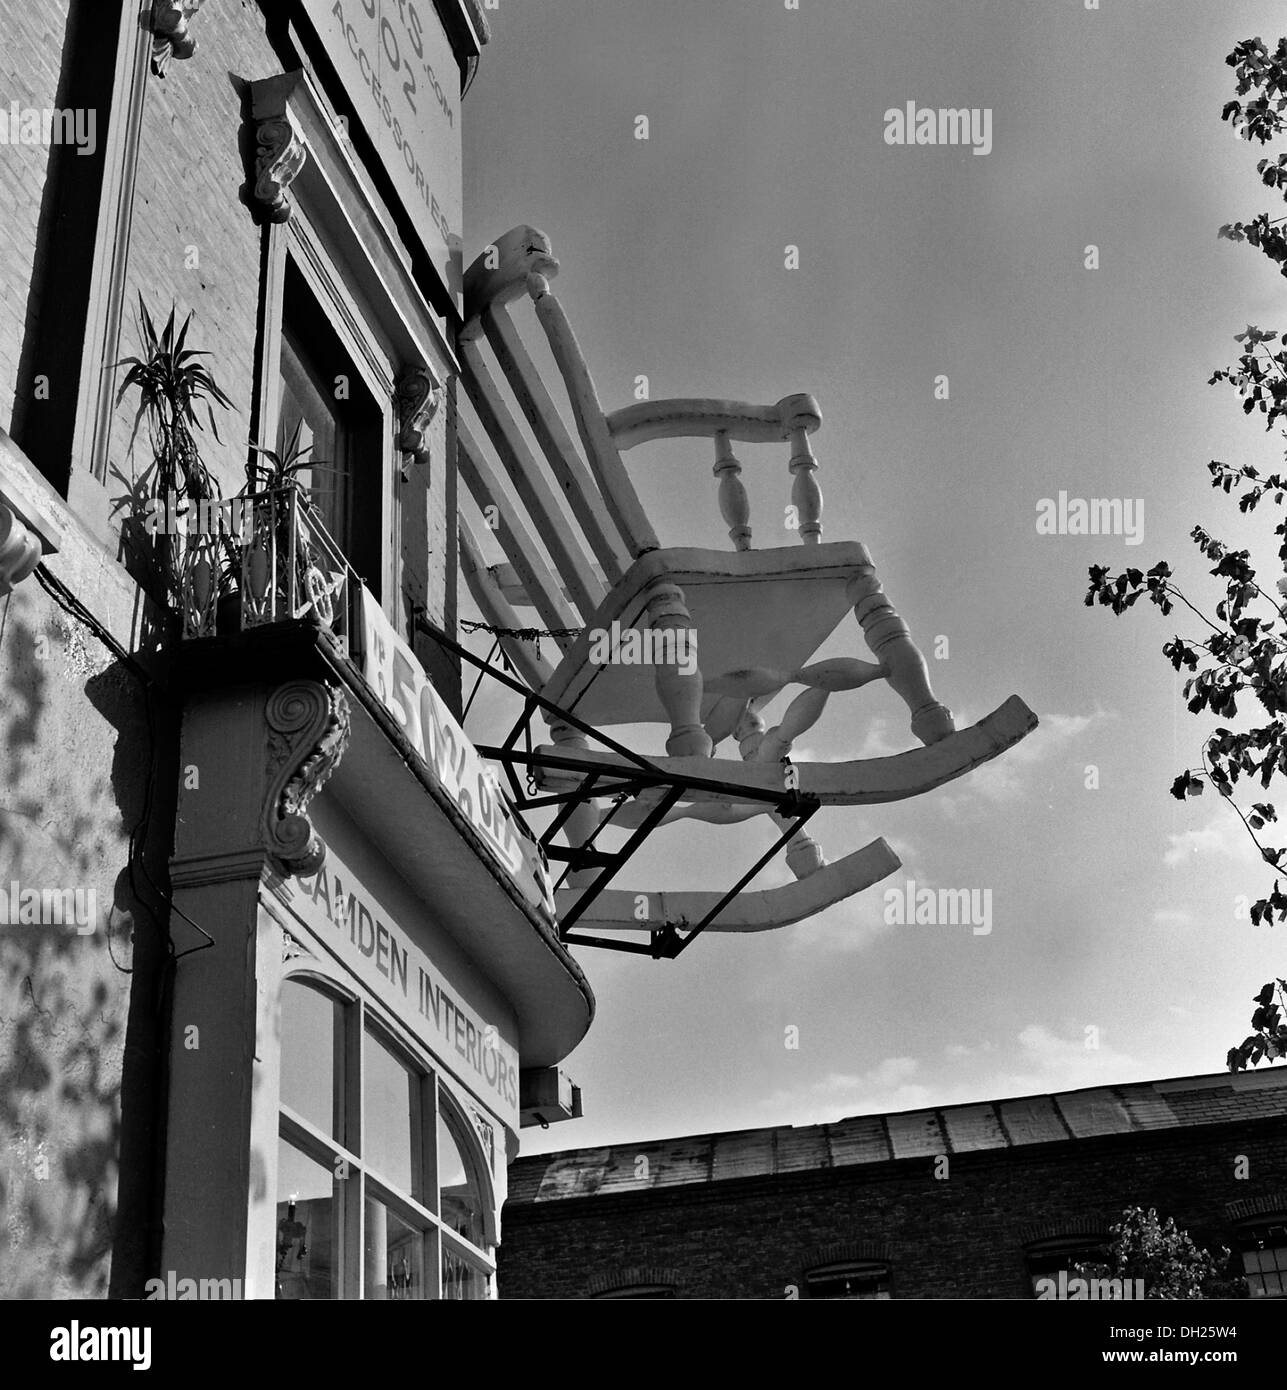 Over sized rocking chair attached to shop front Camden interiors Stock Photo